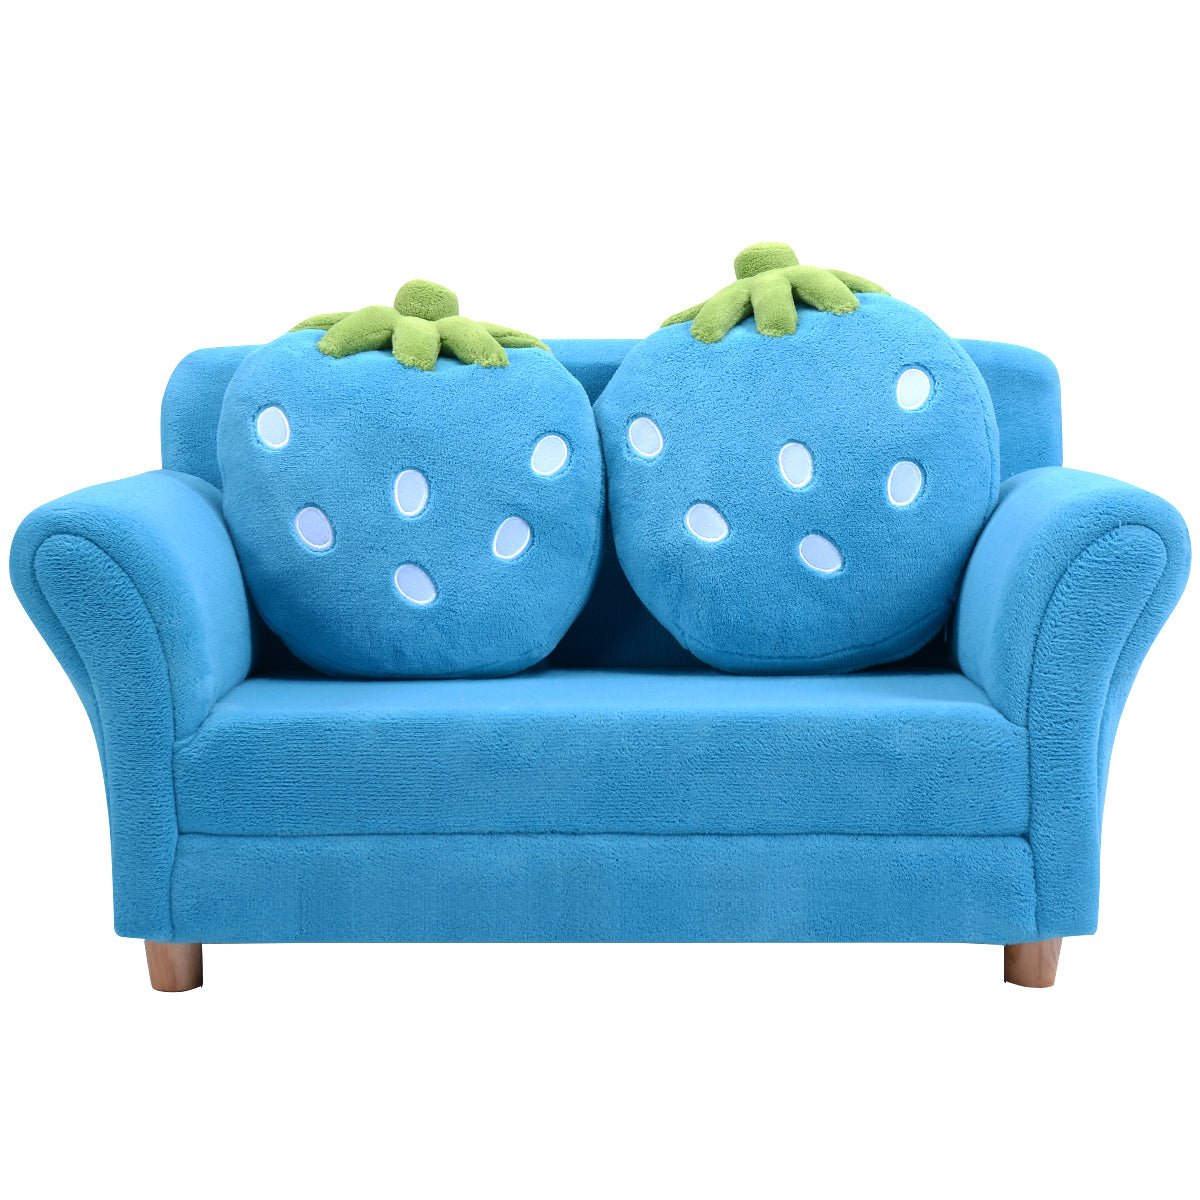 Children's Lounge Bed: 2-Seat Kids Sofa with Cute Strawberry Pillows